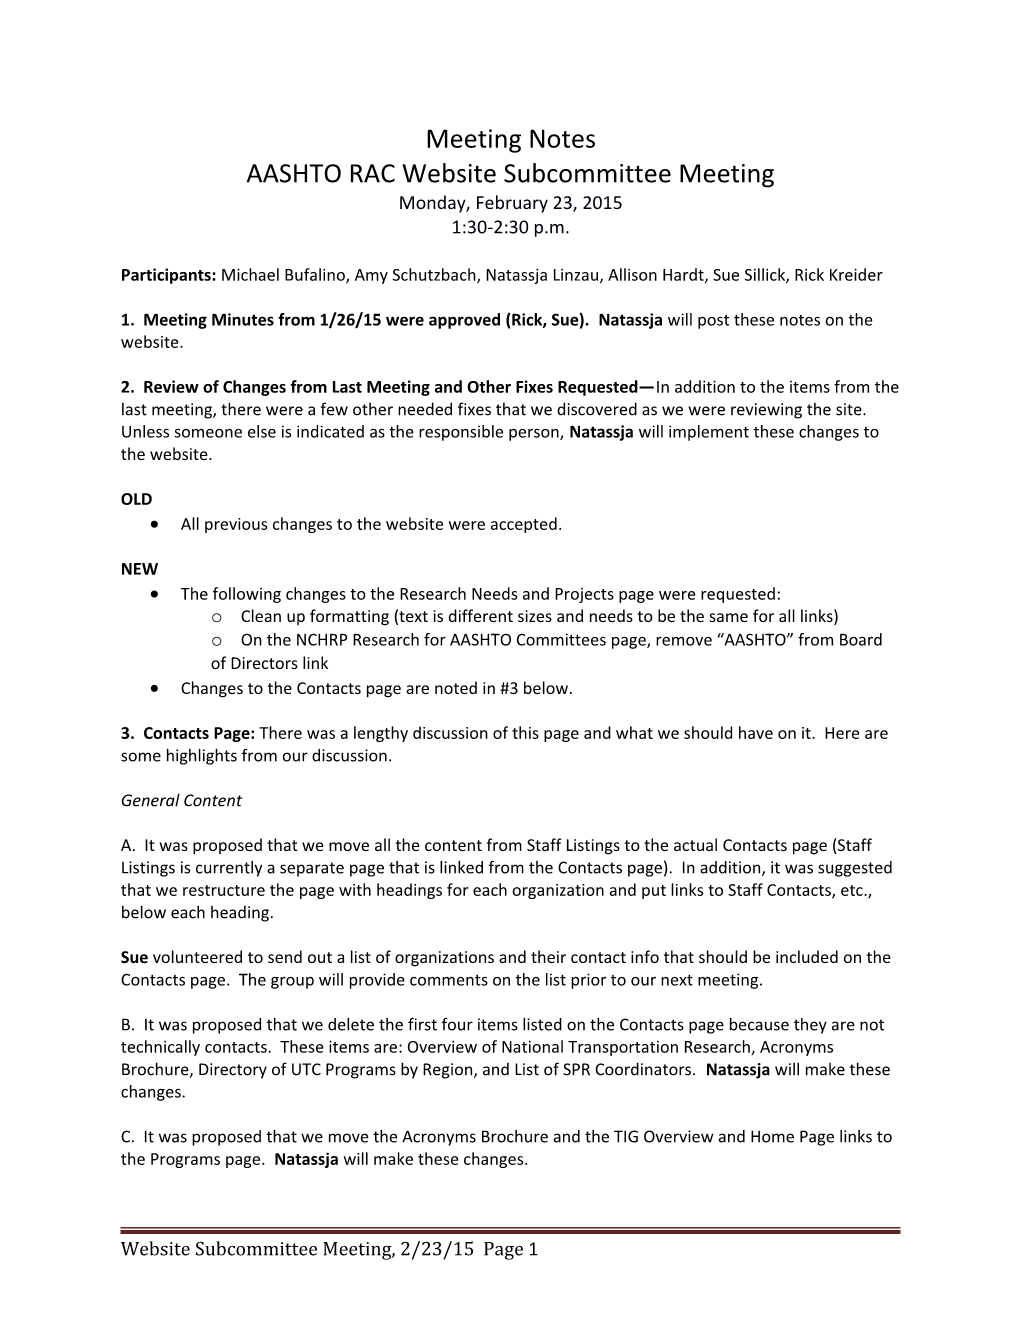 Website Subcommittee Meeting Notes: February 23, 2015